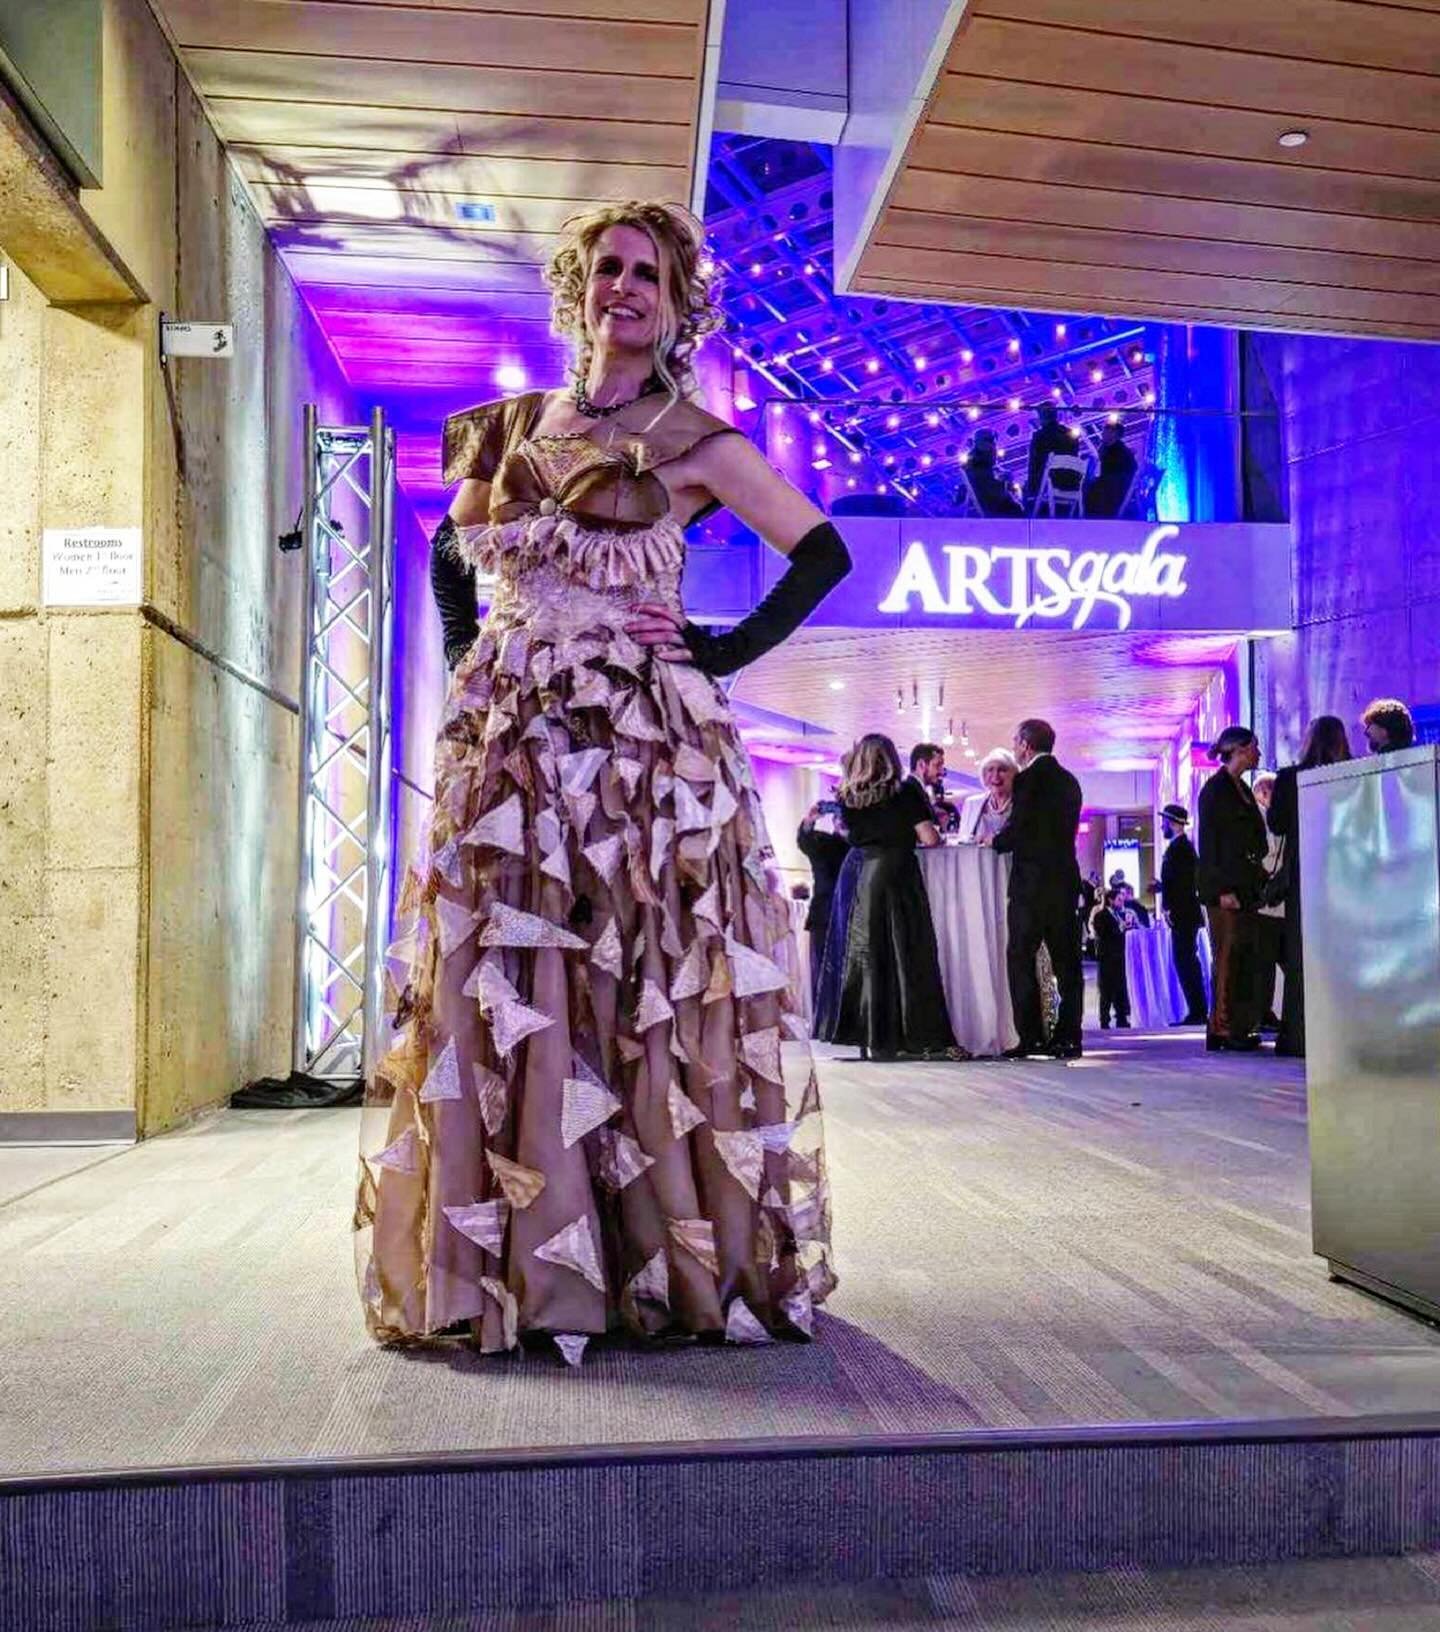 #FashionFriday My gown at this year&rsquo;s ArtsGala at Wright State University! Made from found fabrics and curtain samples.